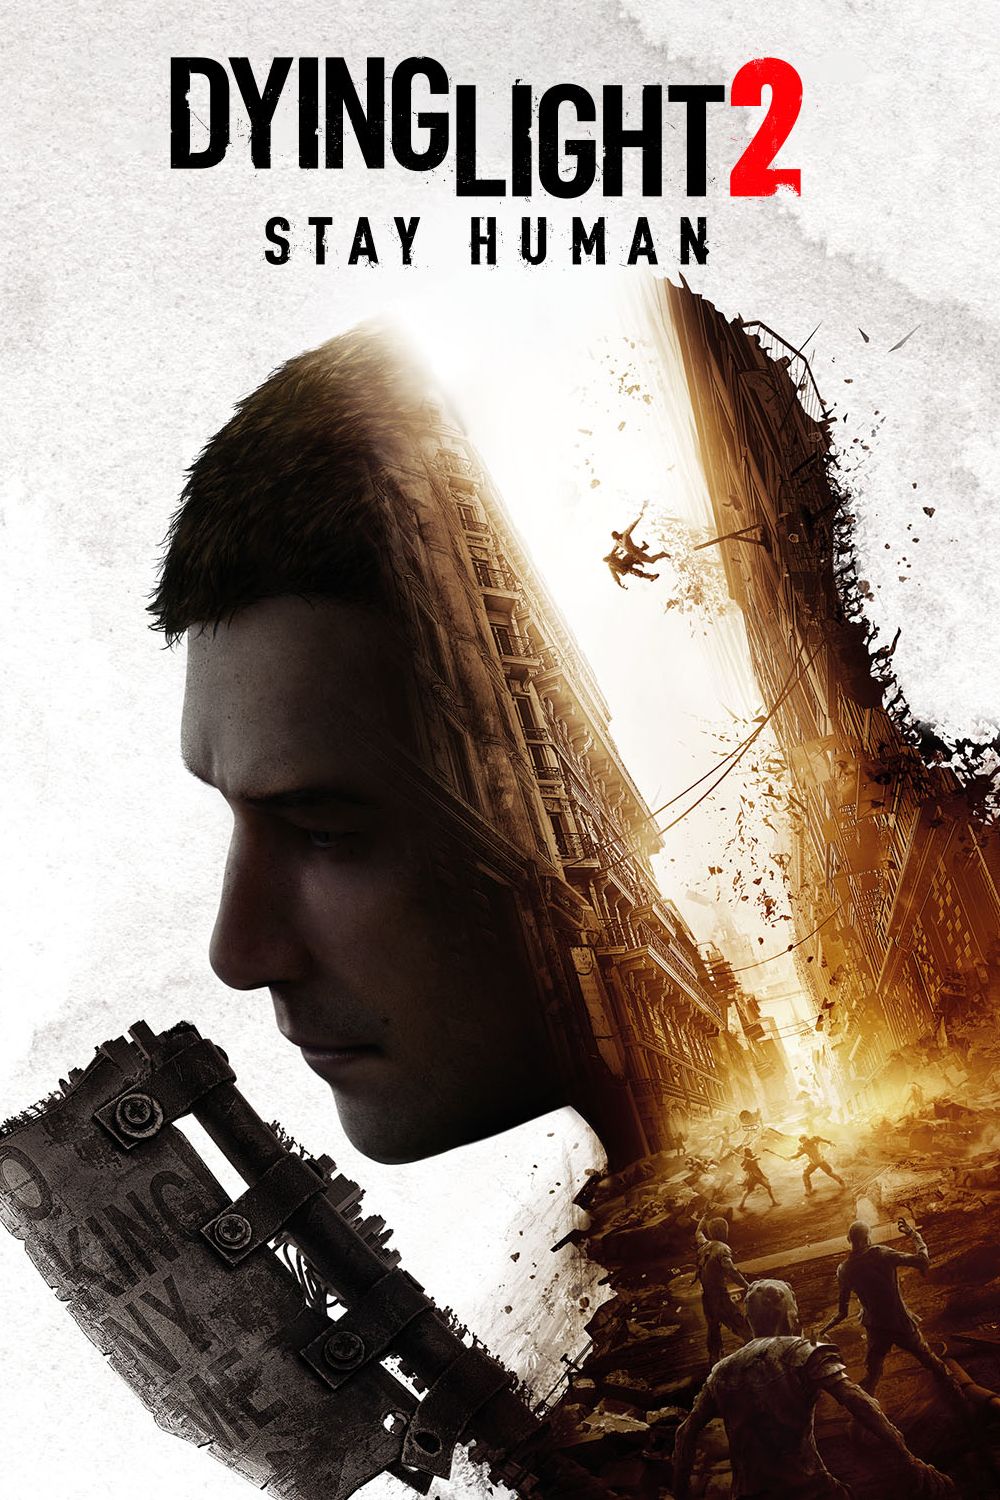 dying light 2 stay human poster